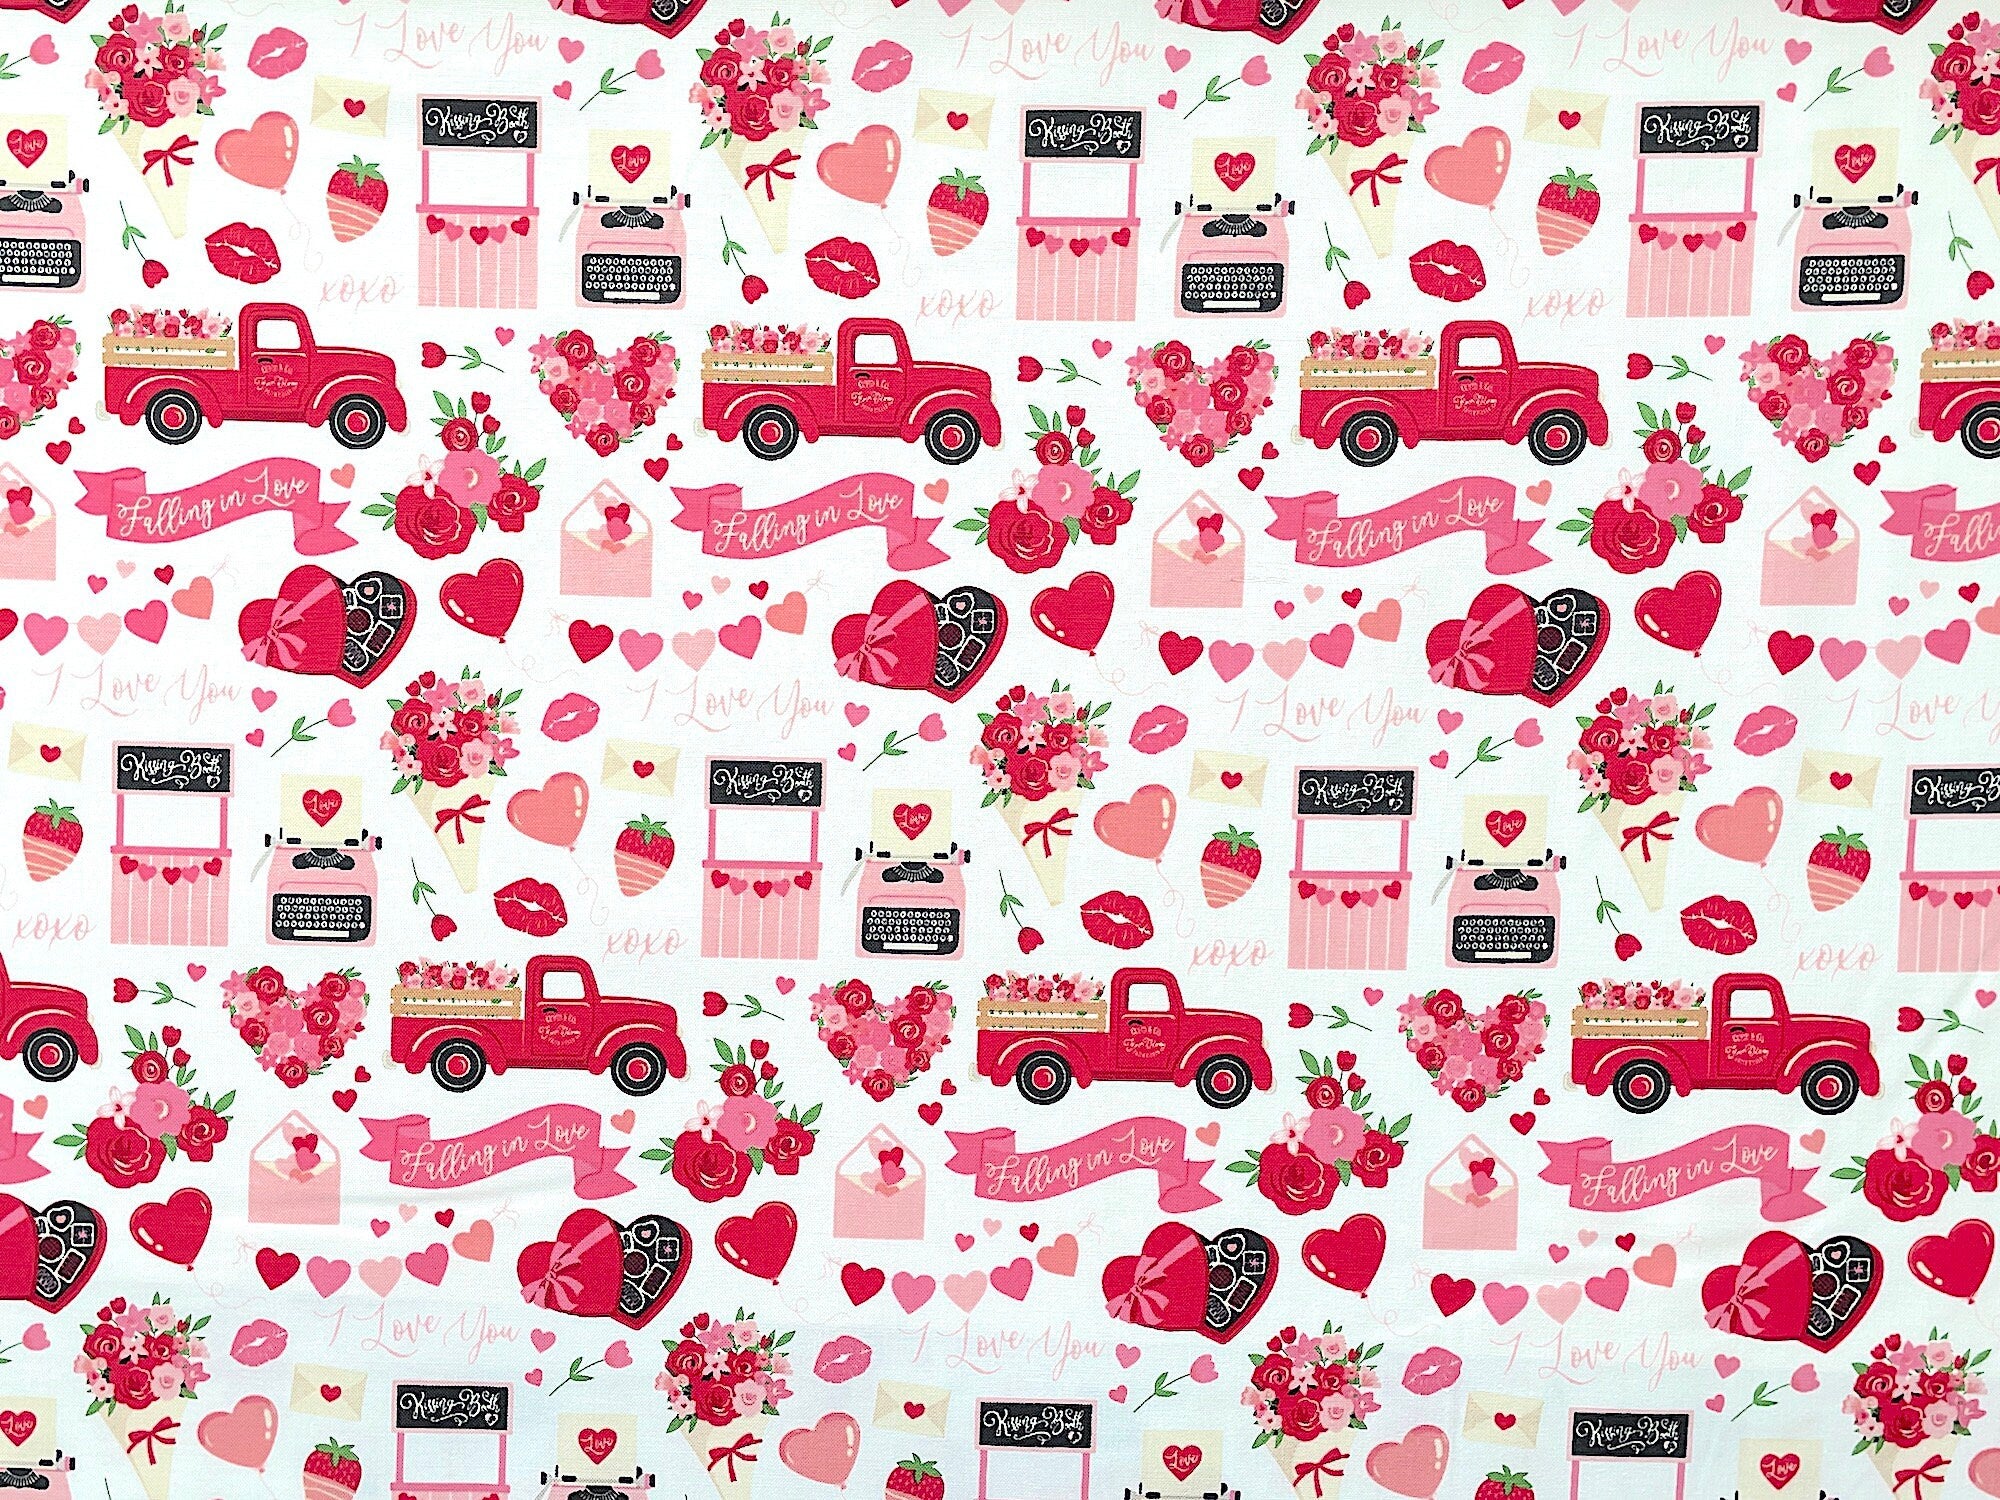 This fabric features an array of hearts, flowers, balloons, love letters, chocolates, trucks, classic Valentine's Day sayings, and other cute pictorials on a white background.